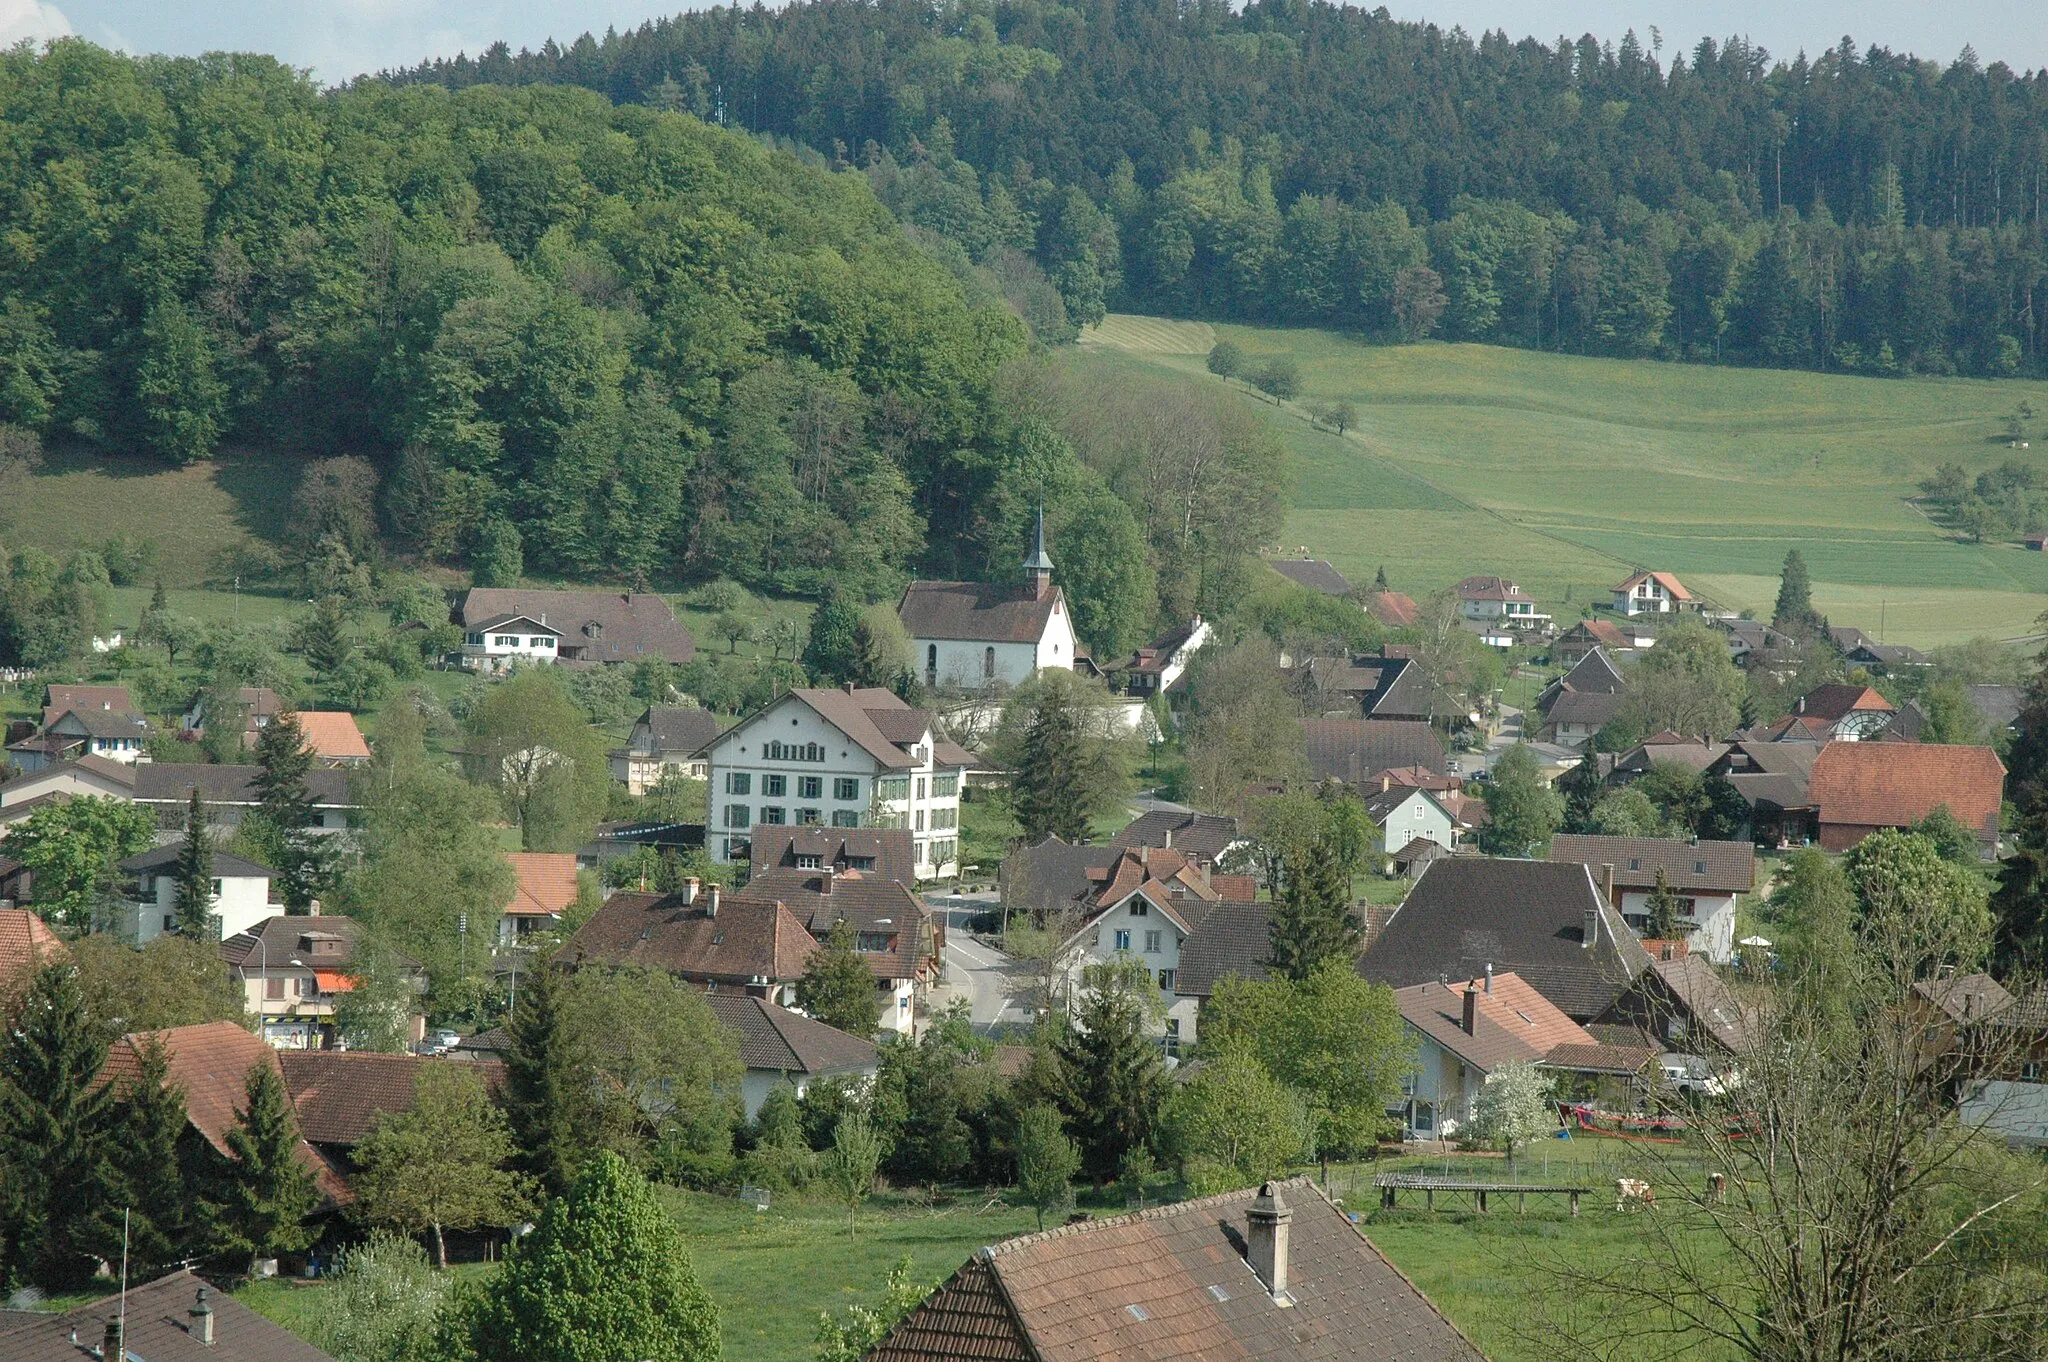 Photo showing: Melchnau (Switzerland), general view of village center, with church and school buildings standing out